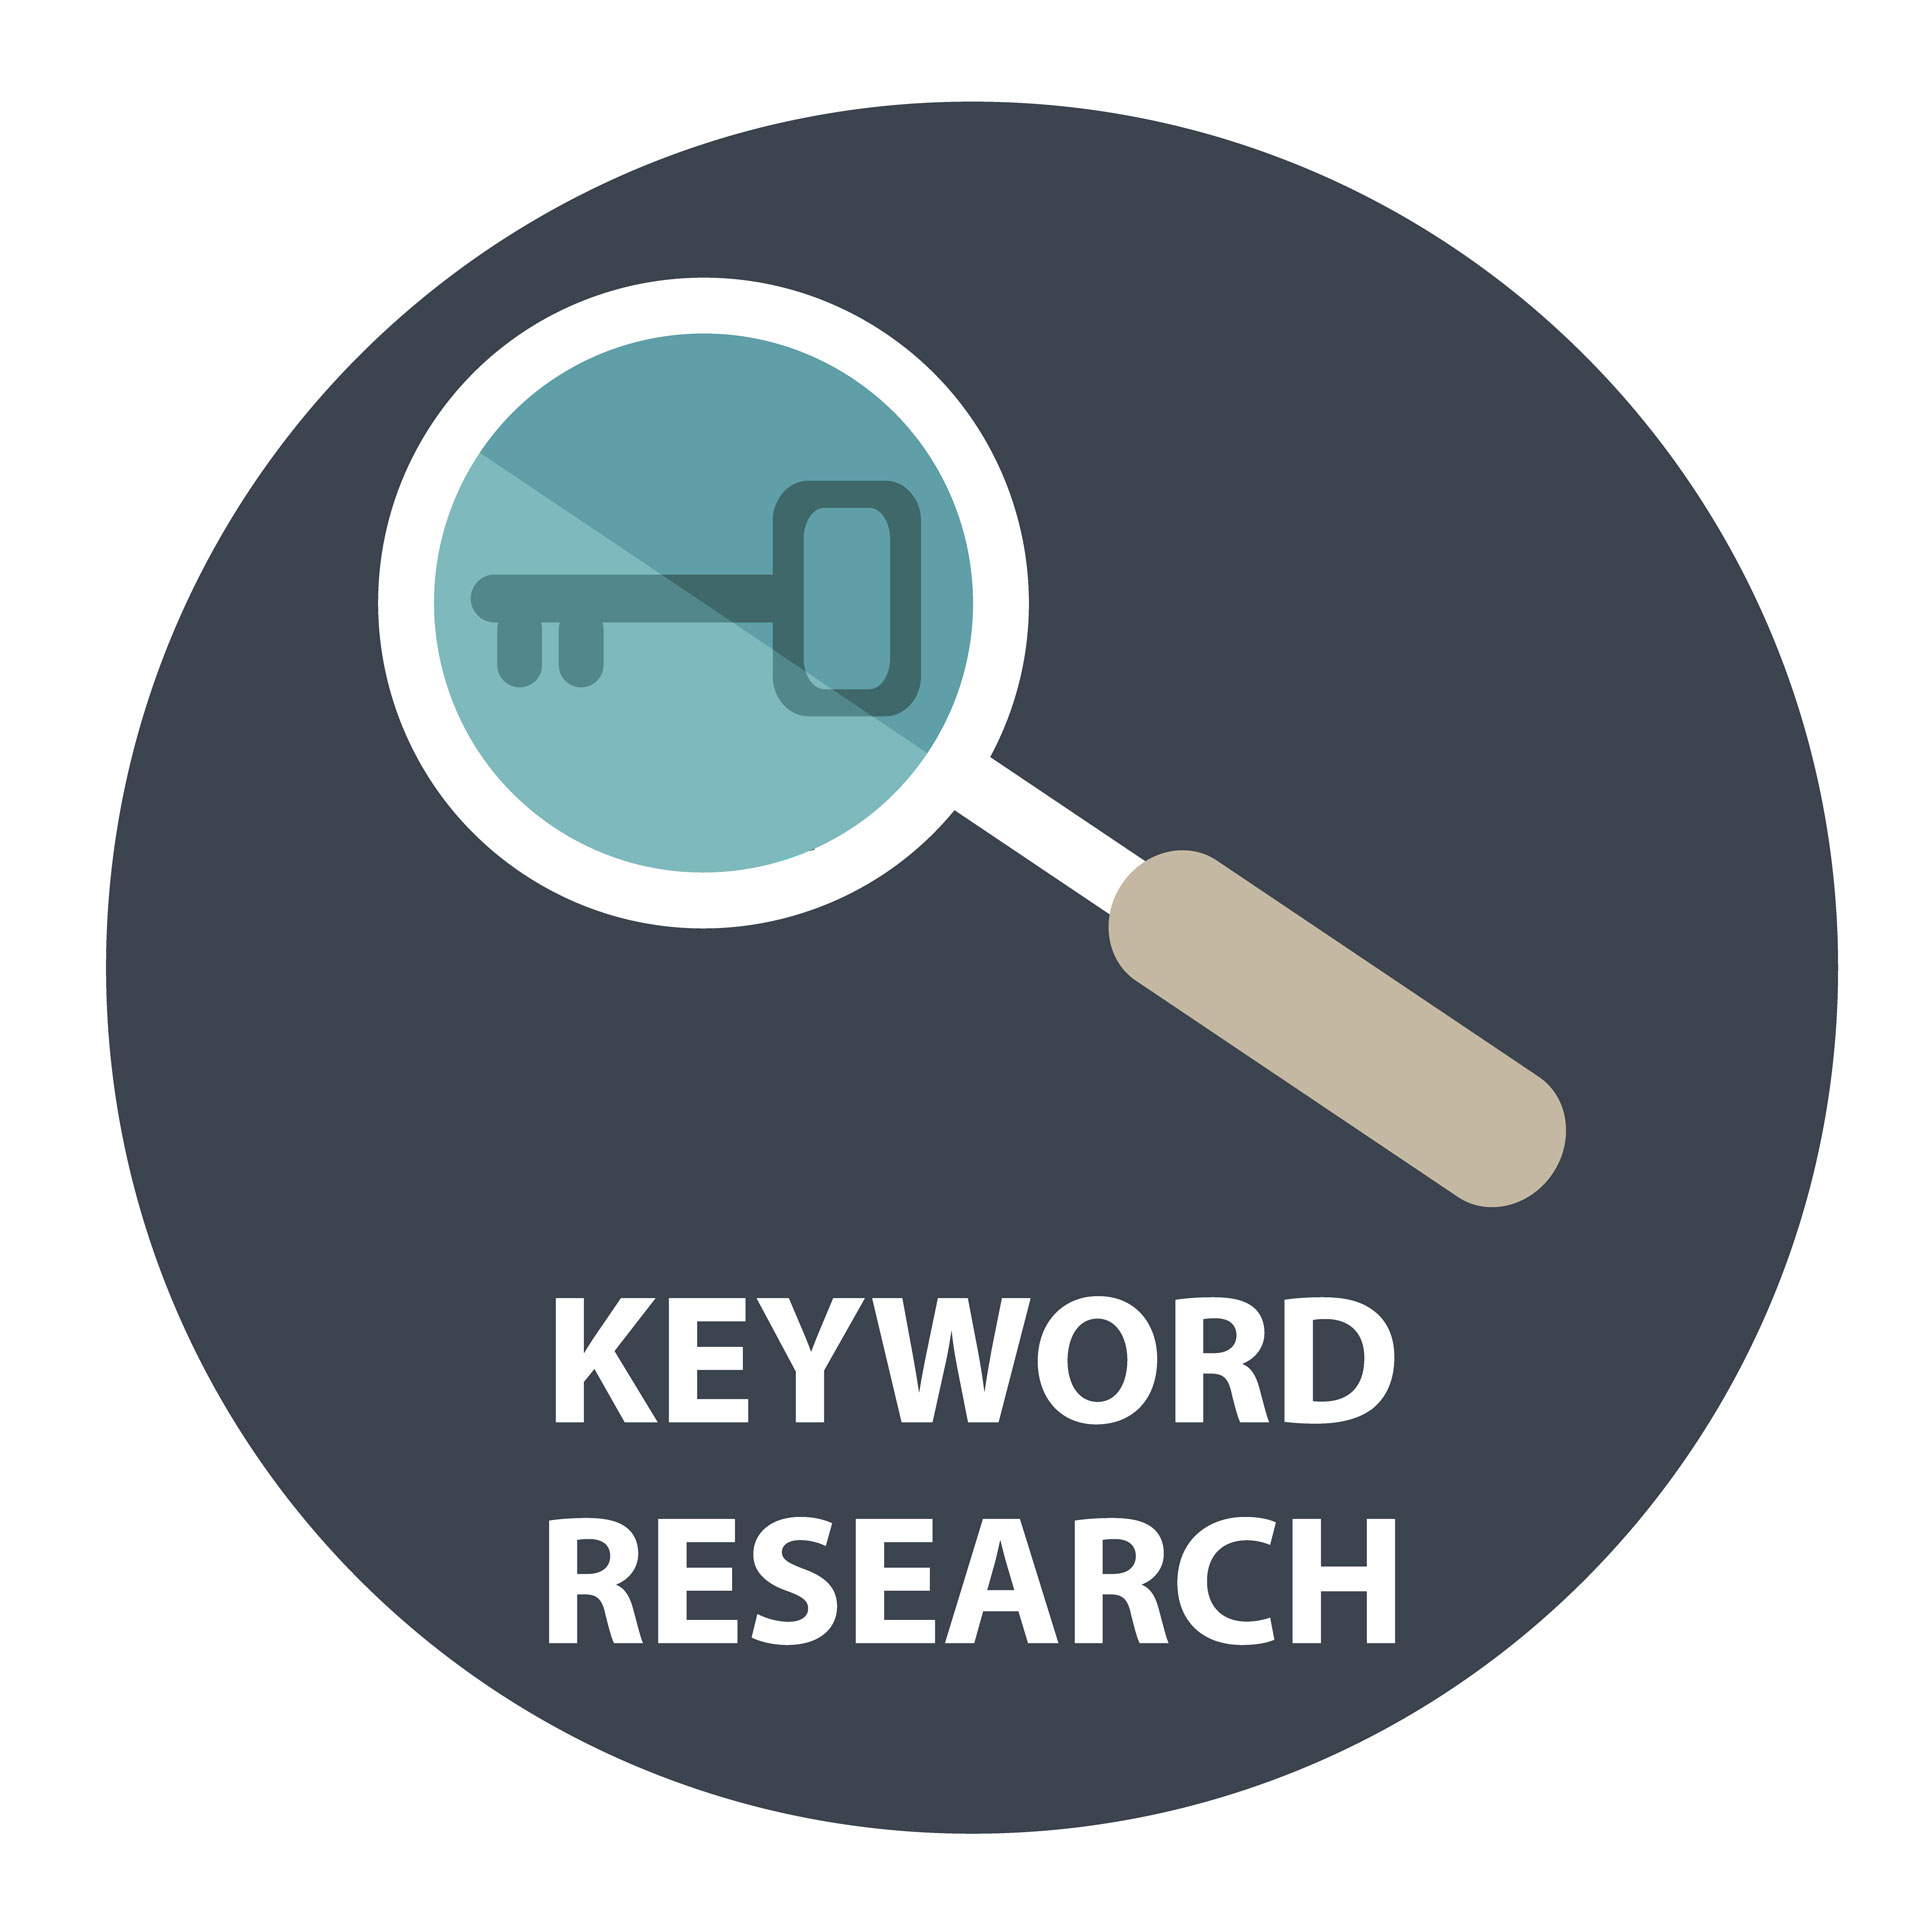 Keyword research text with magnifying glass and key icon